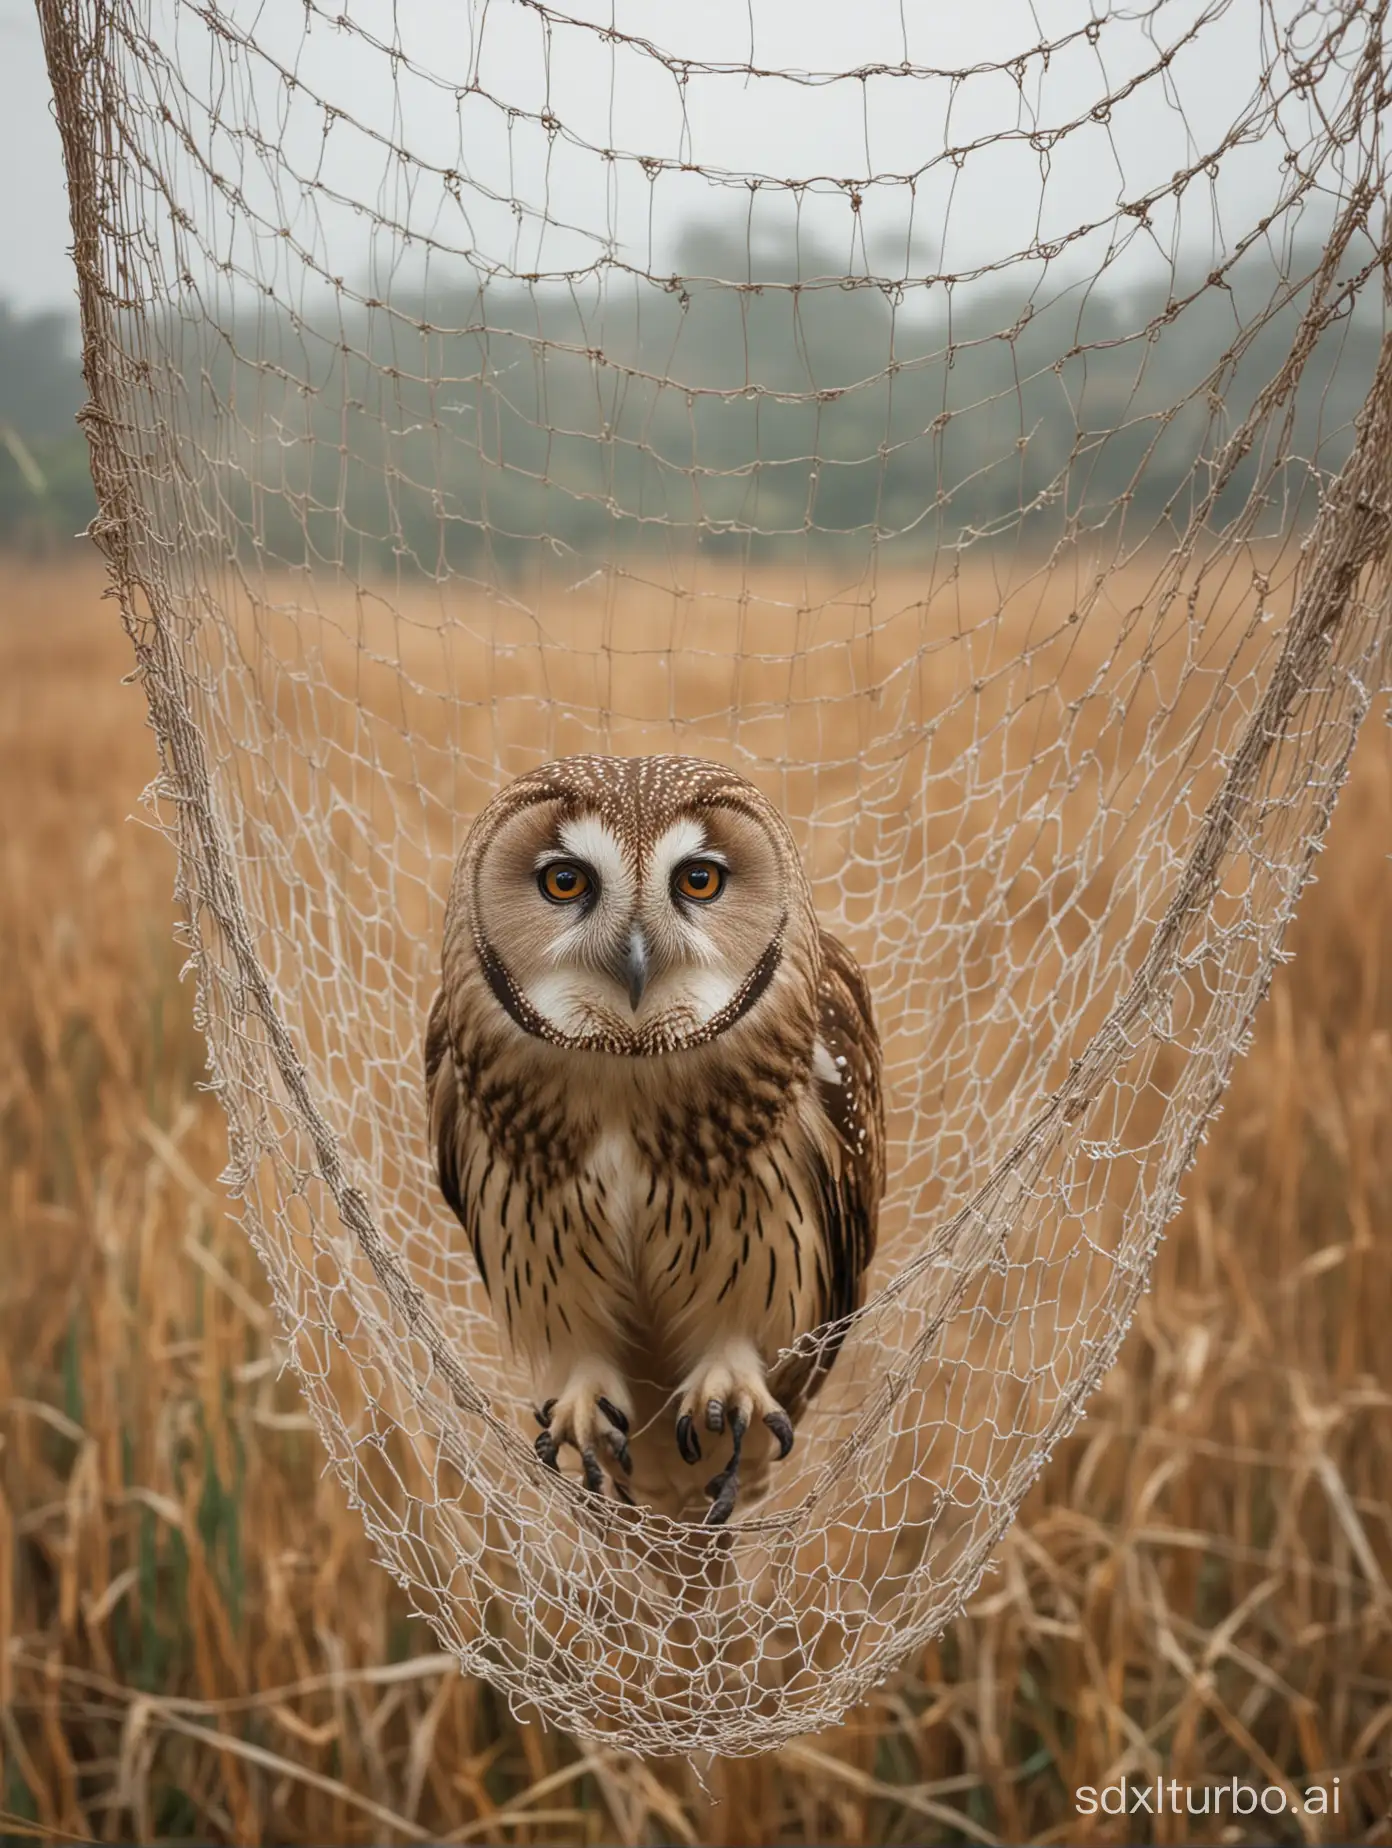 A eastern grass owl struggle in a tight anti-bird net,background is set in a Taiwan farmland,farmland is over-cultivated,soft light,cloudy,cold colors,high resolution,Frans Lanting,Long Shot, high contrast, 24mm,realistic style.